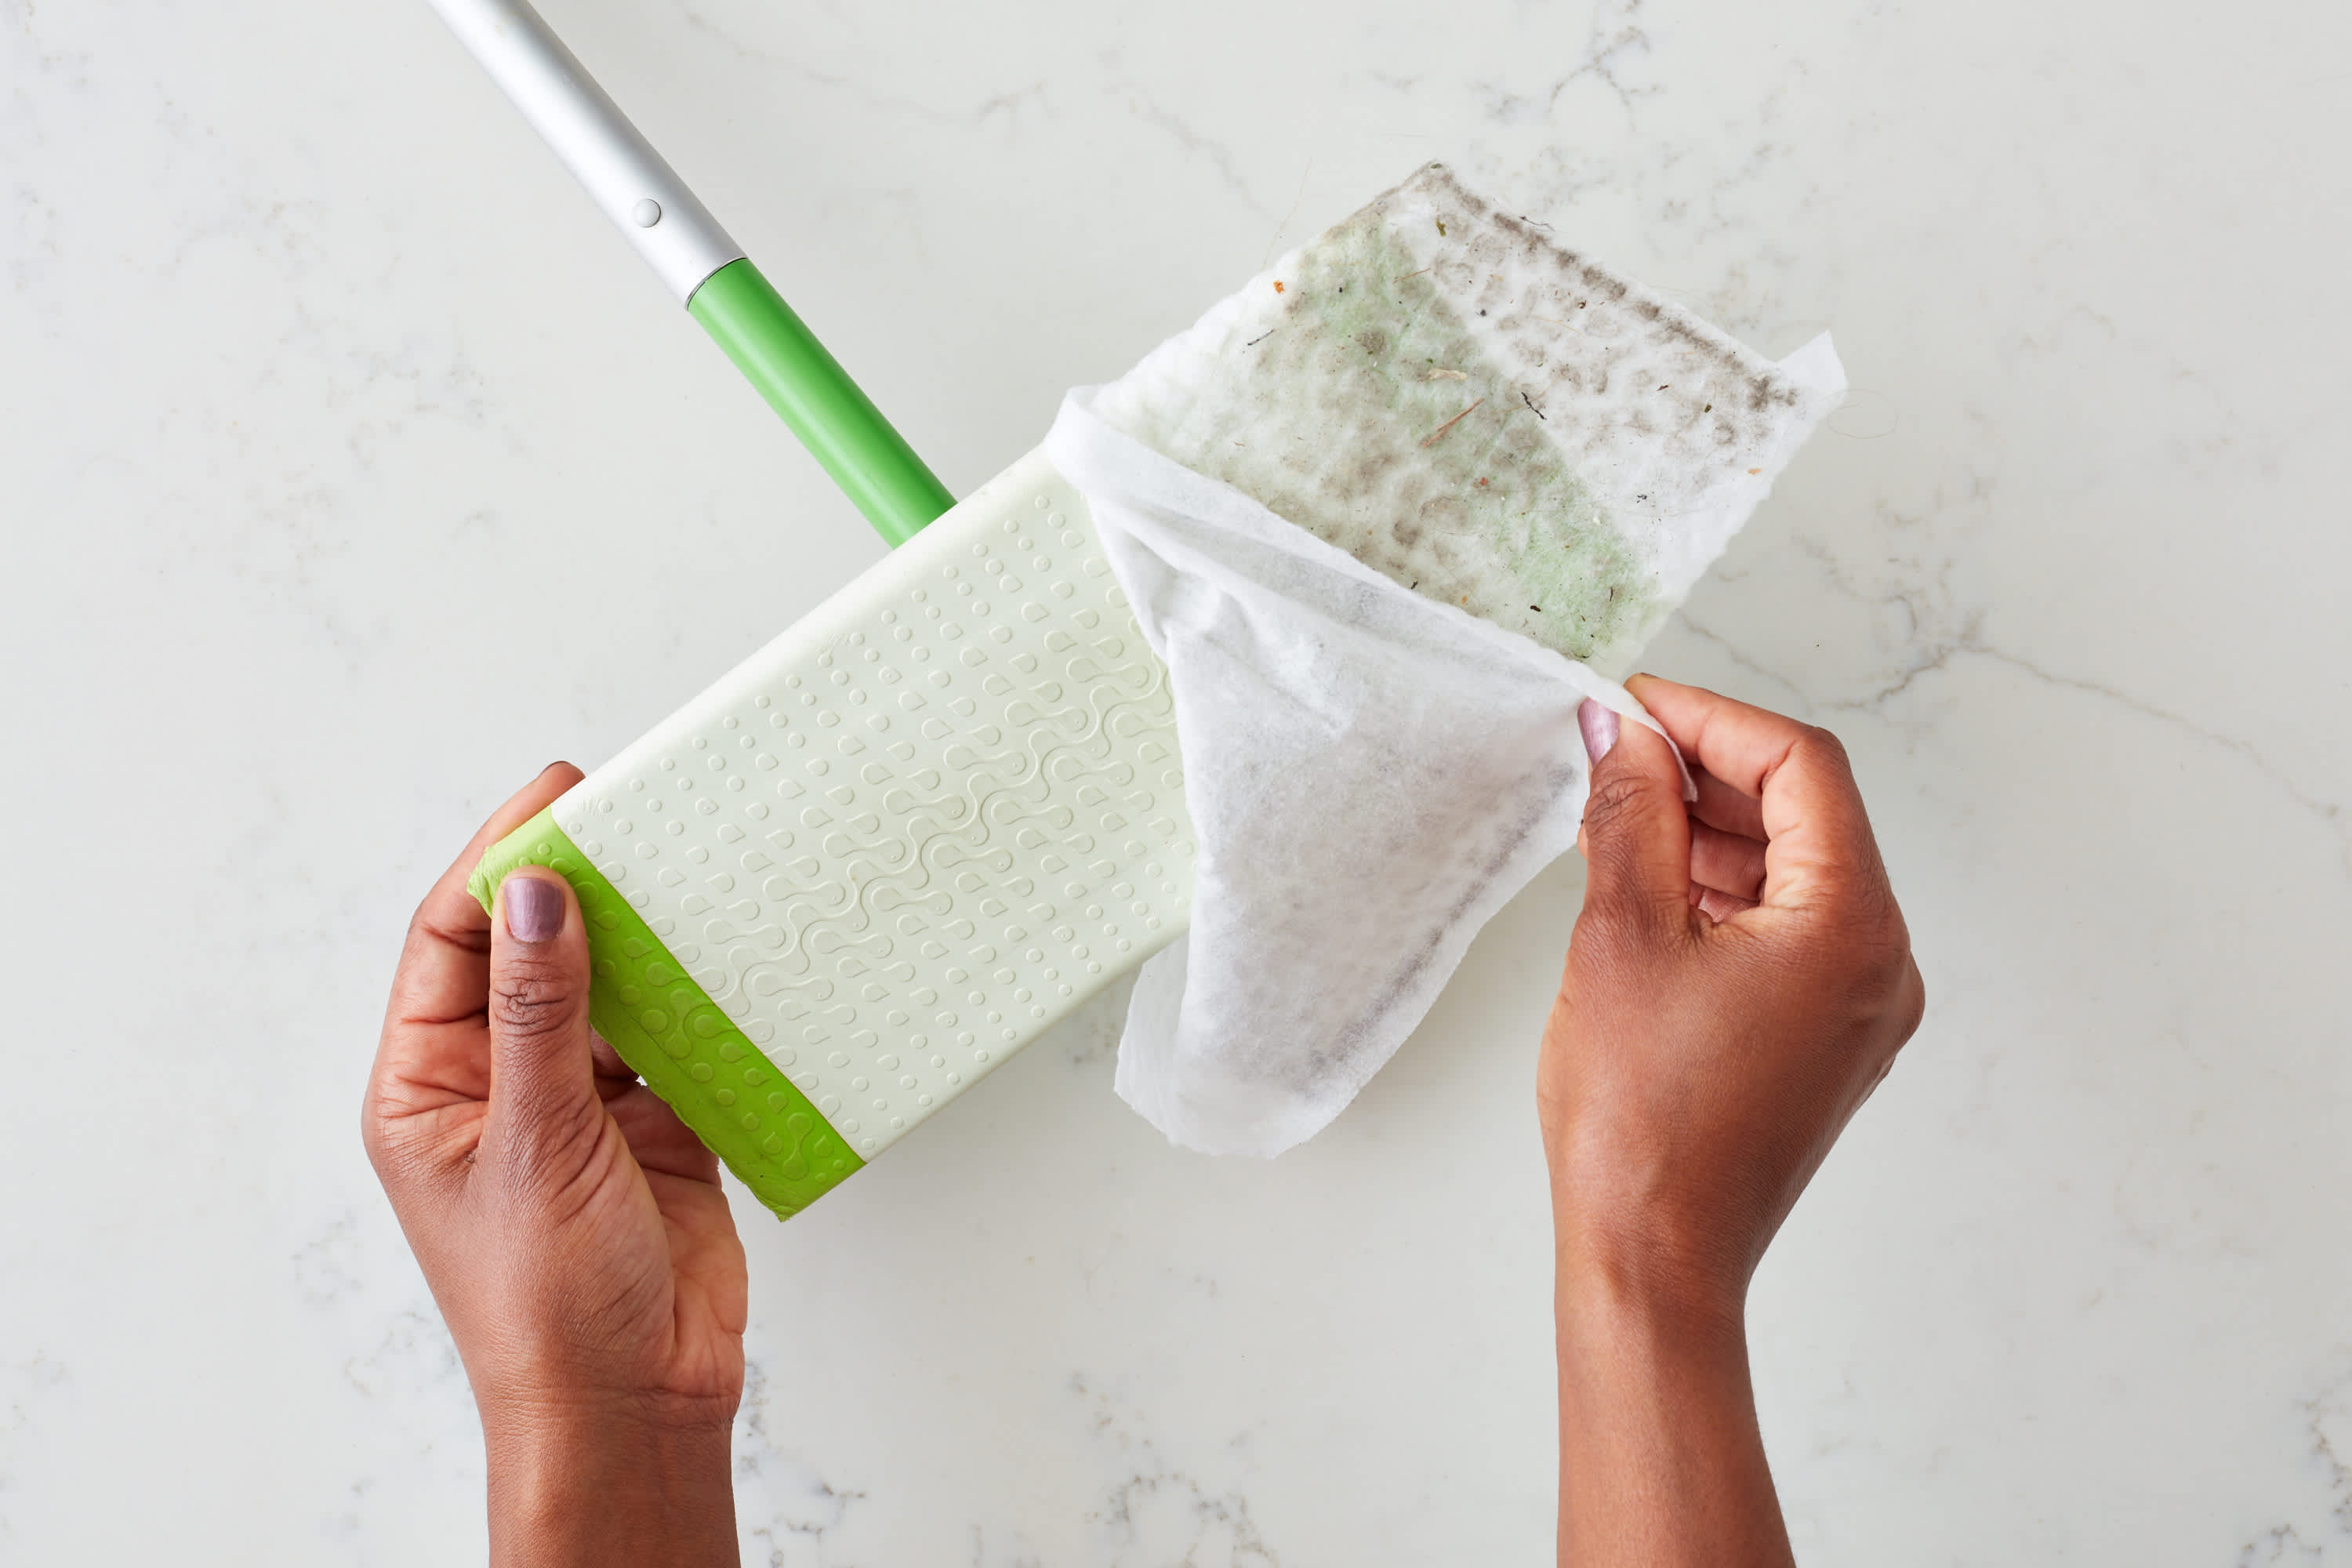 My Online Finds on Instagram: The VIRAL Scrub Brush! We've been